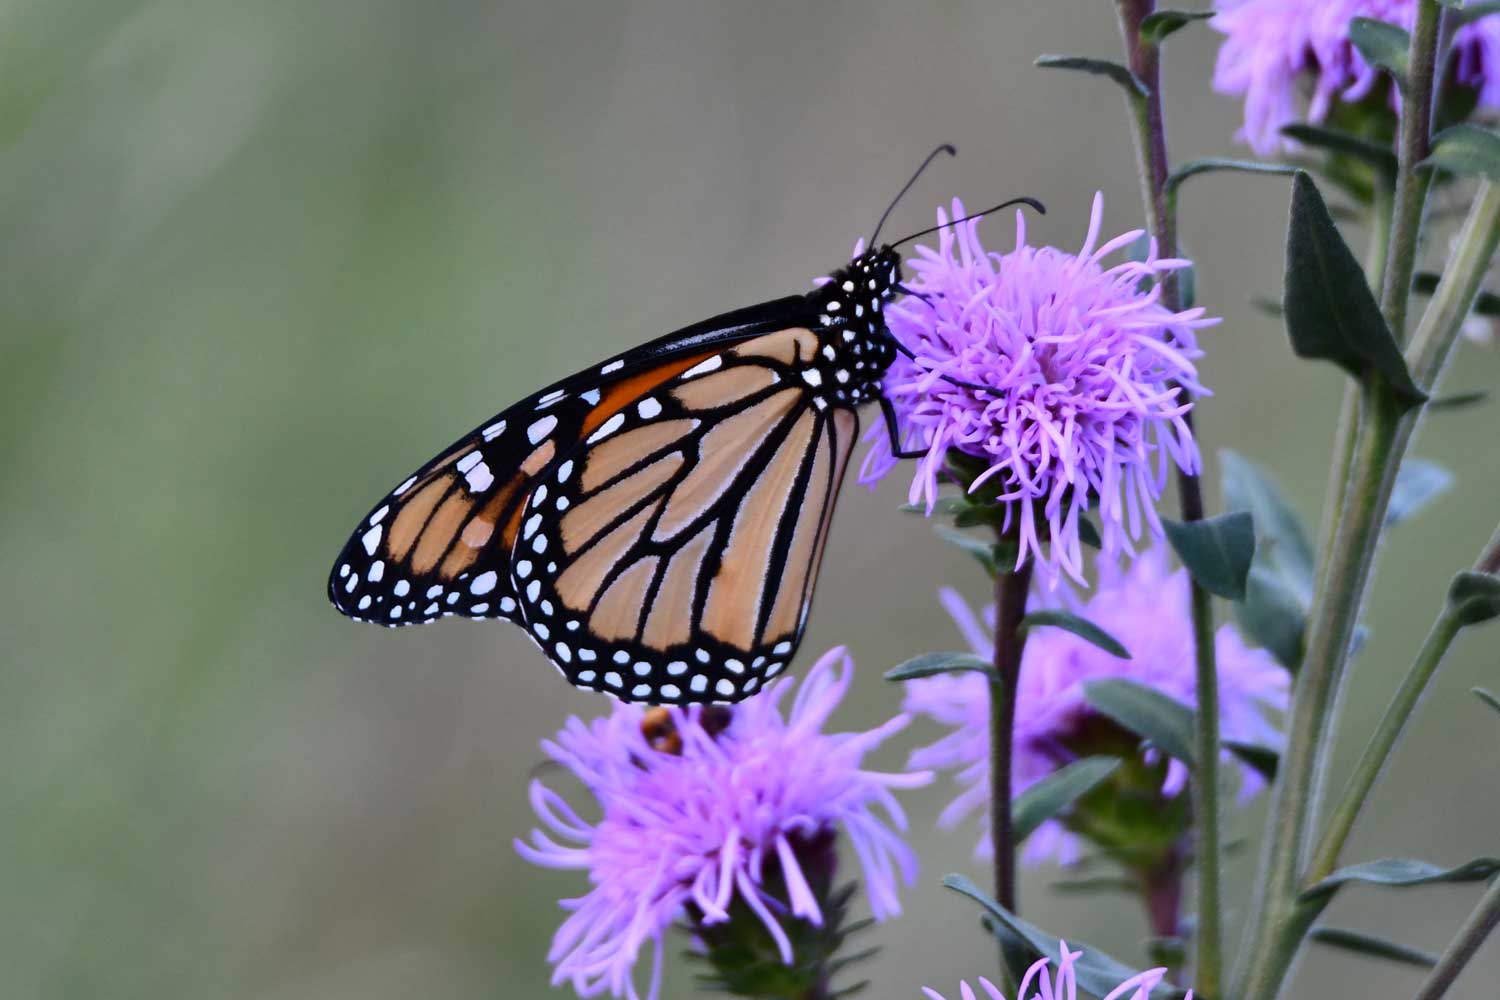 Monarch butterfly perched on flower blooms.